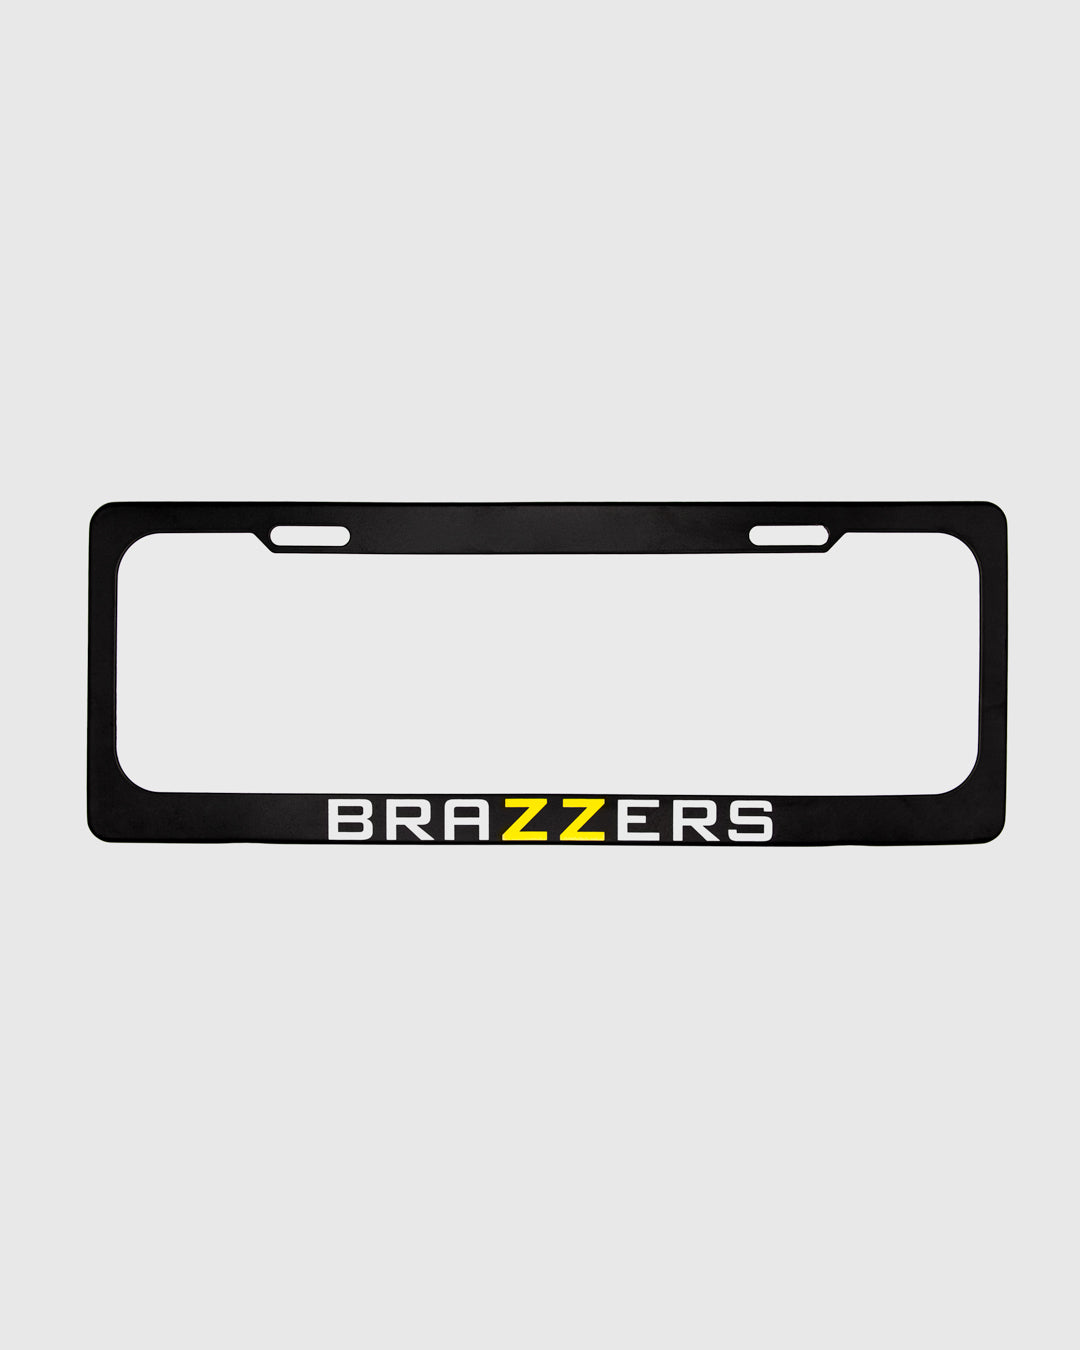 brazzers-license-plate-frame_AUS